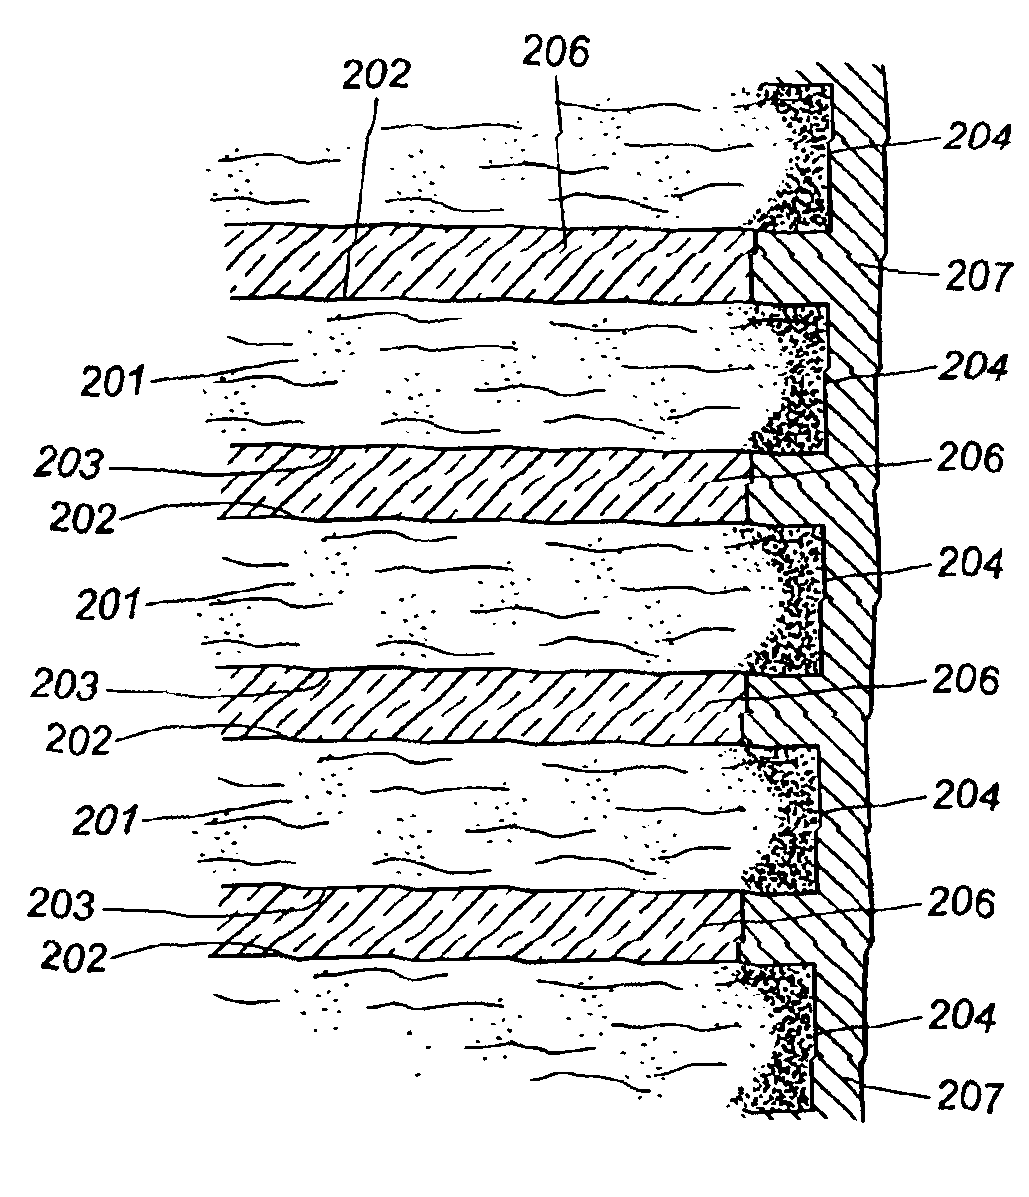 Edge coated gaskets and method of making same